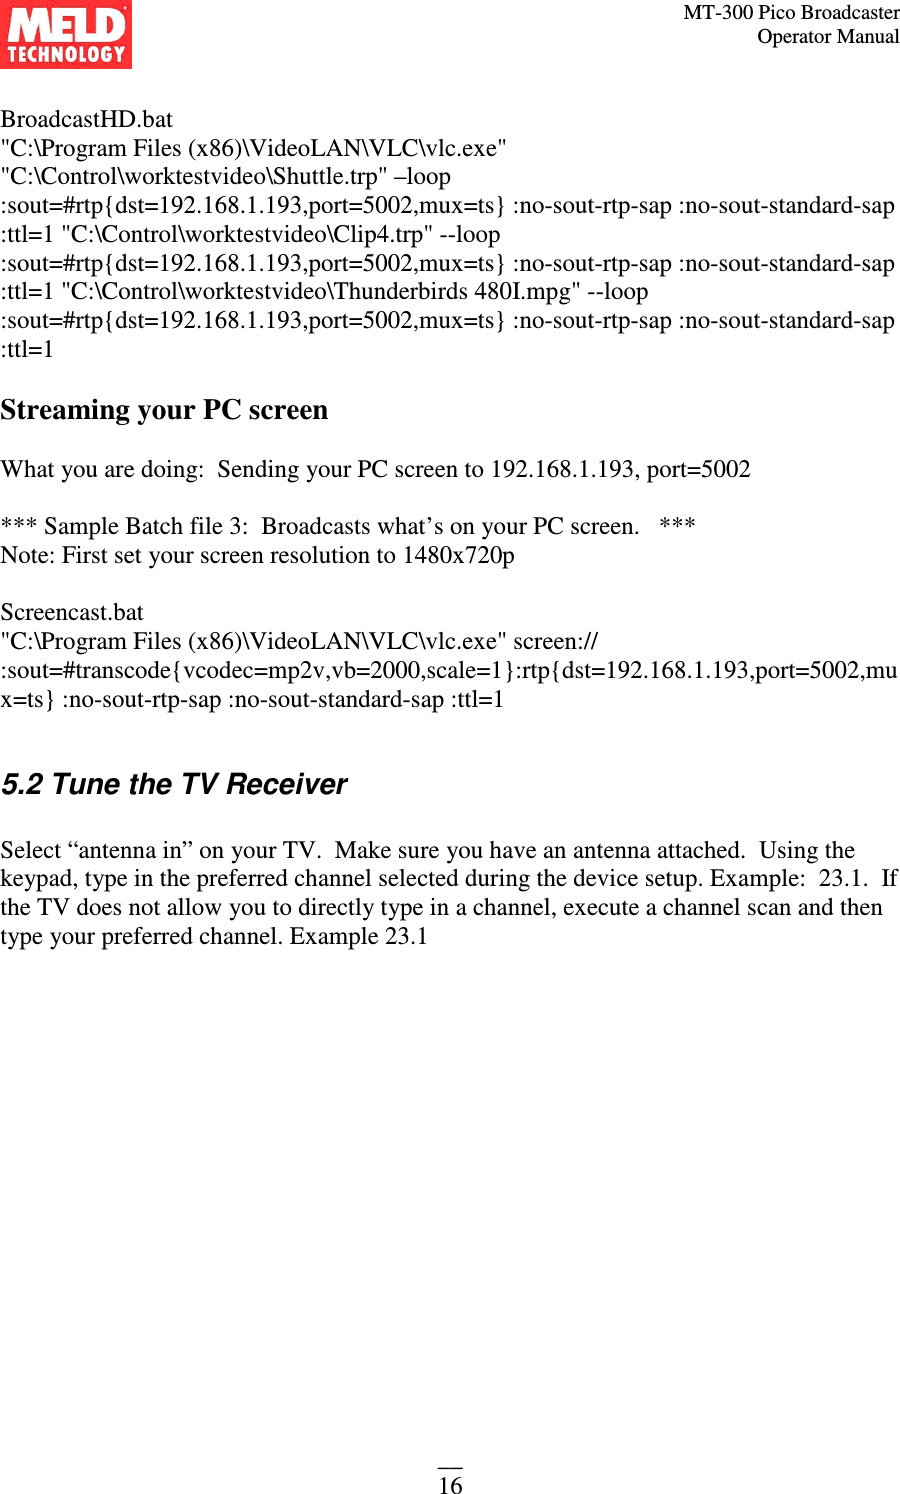 MT-300 Pico Broadcaster                                                                                                                                             Operator Manual __ 16  BroadcastHD.bat &quot;C:\Program Files (x86)\VideoLAN\VLC\vlc.exe&quot; &quot;C:\Control\worktestvideo\Shuttle.trp&quot; –loop :sout=#rtp{dst=192.168.1.193,port=5002,mux=ts} :no-sout-rtp-sap :no-sout-standard-sap :ttl=1 &quot;C:\Control\worktestvideo\Clip4.trp&quot; --loop :sout=#rtp{dst=192.168.1.193,port=5002,mux=ts} :no-sout-rtp-sap :no-sout-standard-sap :ttl=1 &quot;C:\Control\worktestvideo\Thunderbirds 480I.mpg&quot; --loop :sout=#rtp{dst=192.168.1.193,port=5002,mux=ts} :no-sout-rtp-sap :no-sout-standard-sap :ttl=1  Streaming your PC screen  What you are doing:  Sending your PC screen to 192.168.1.193, port=5002  *** Sample Batch file 3:  Broadcasts what’s on your PC screen.   ***  Note: First set your screen resolution to 1480x720p  Screencast.bat &quot;C:\Program Files (x86)\VideoLAN\VLC\vlc.exe&quot; screen:// :sout=#transcode{vcodec=mp2v,vb=2000,scale=1}:rtp{dst=192.168.1.193,port=5002,mux=ts} :no-sout-rtp-sap :no-sout-standard-sap :ttl=1  5.2 Tune the TV Receiver  Select “antenna in” on your TV.  Make sure you have an antenna attached.  Using the keypad, type in the preferred channel selected during the device setup. Example:  23.1.  If the TV does not allow you to directly type in a channel, execute a channel scan and then type your preferred channel. Example 23.1   